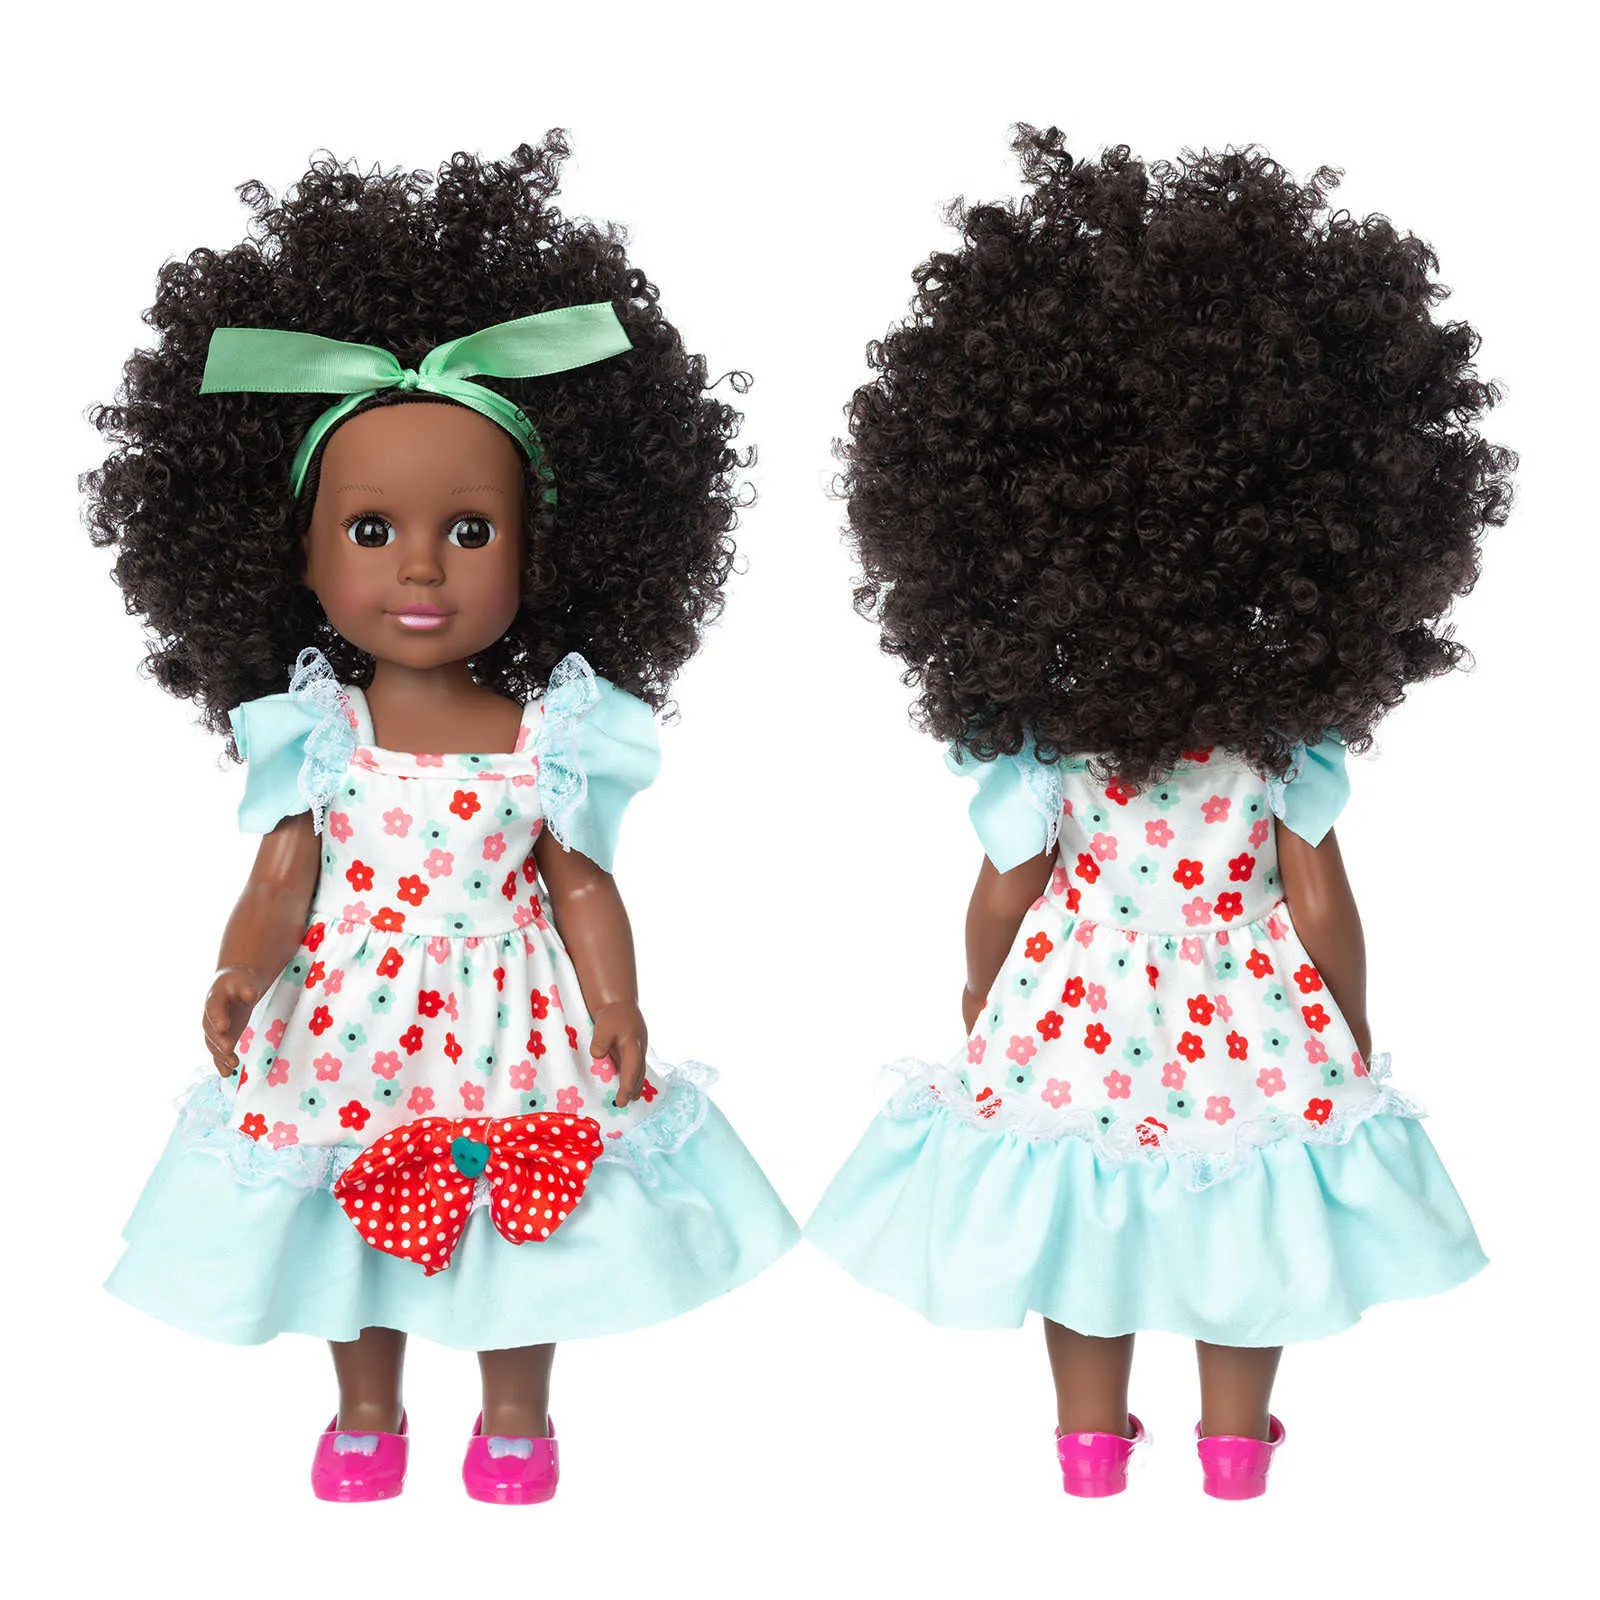 Black Girl Dolls African American Play Soft Baby Realistic Dolls Lifelike Simulation Baby Play Dolls Fun Kids Toy Gifts Gift Q0910